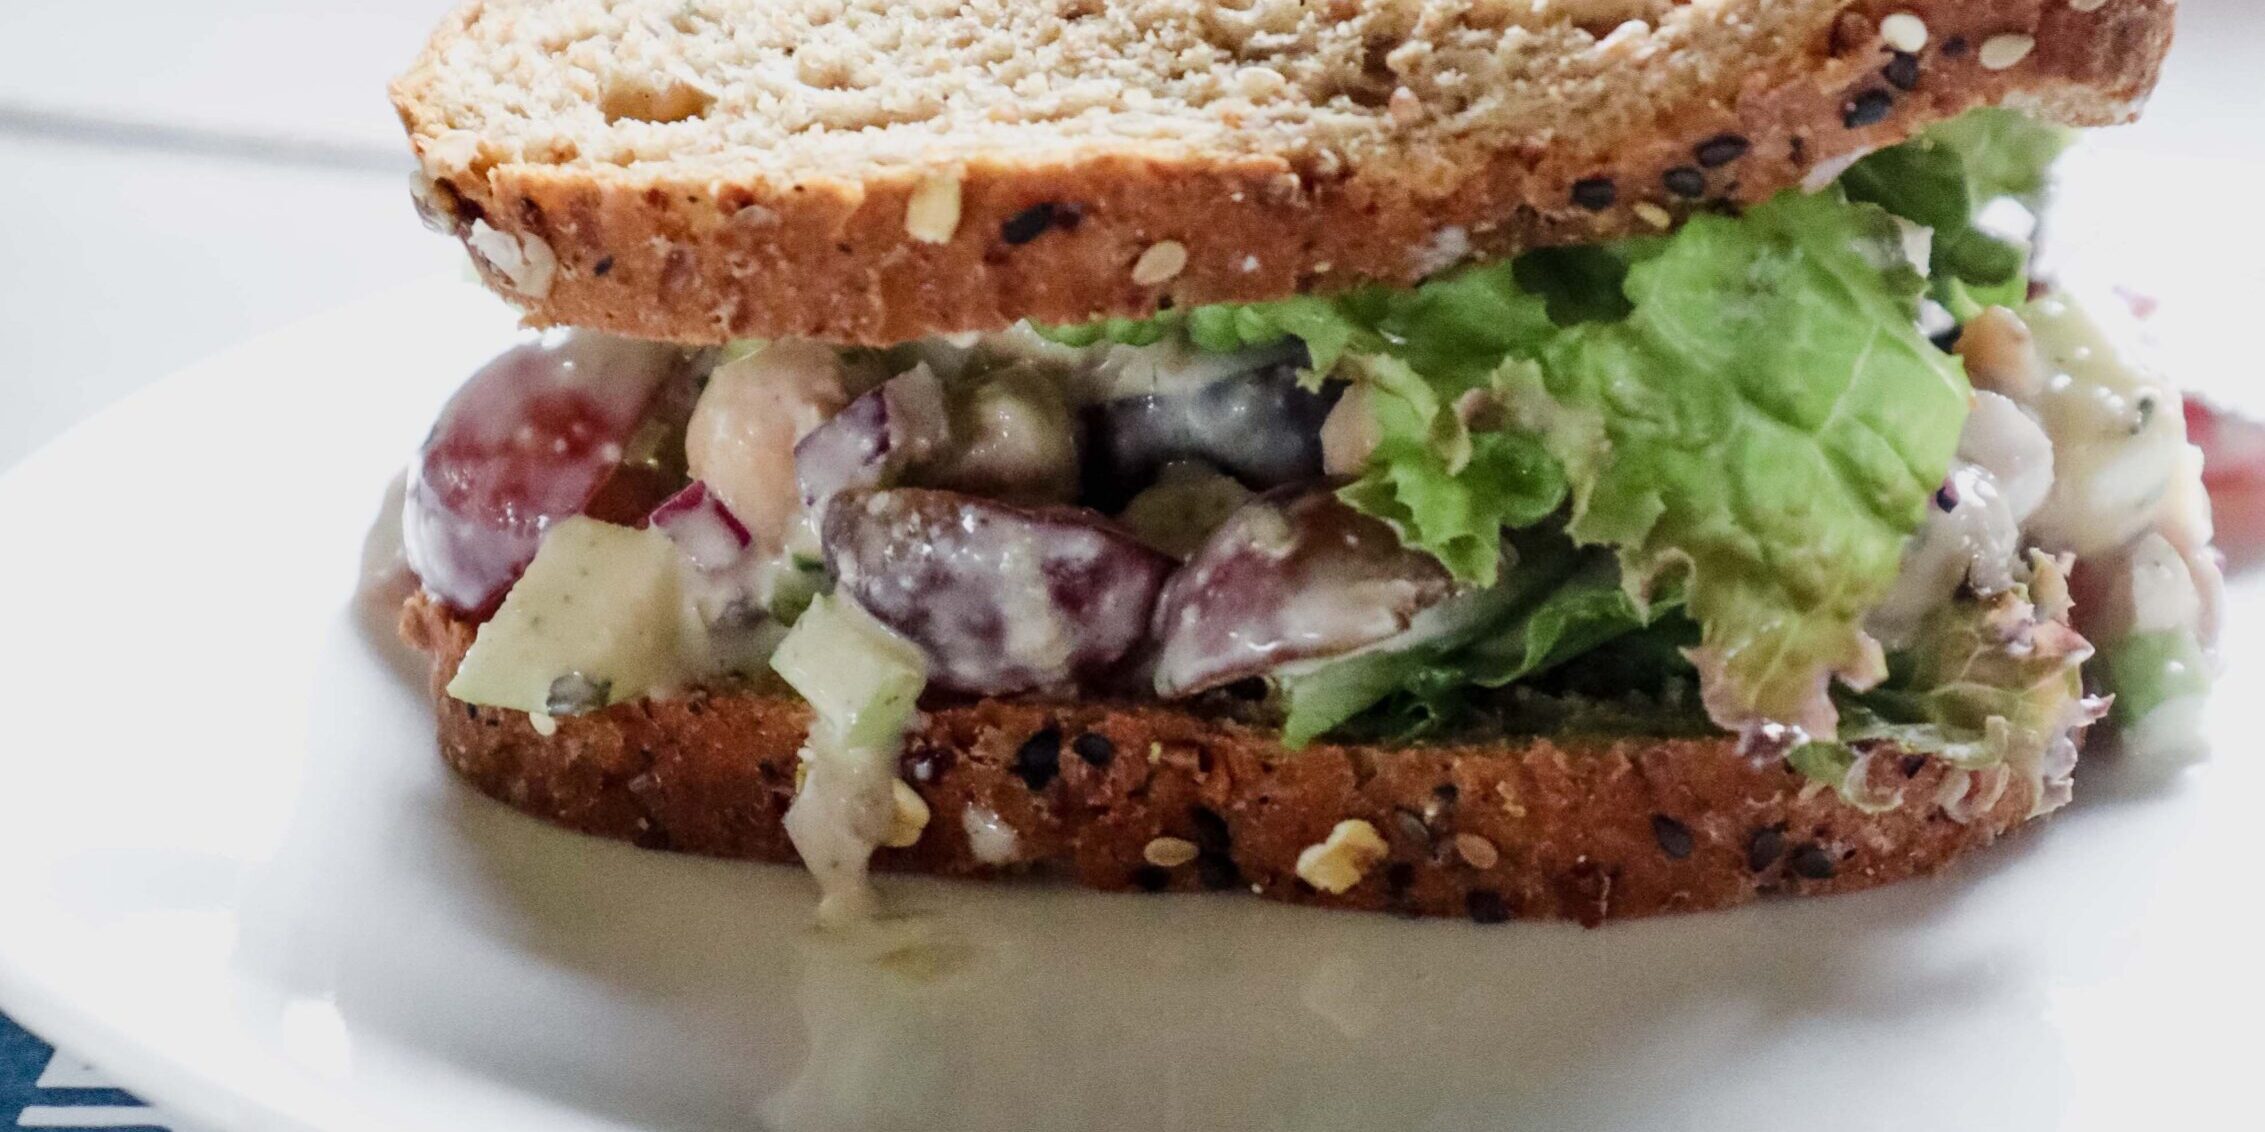 sandwich on whole grain seeded bread with side angle shot, full of a creamy chickpea, grape, apply, and onion salad filling.